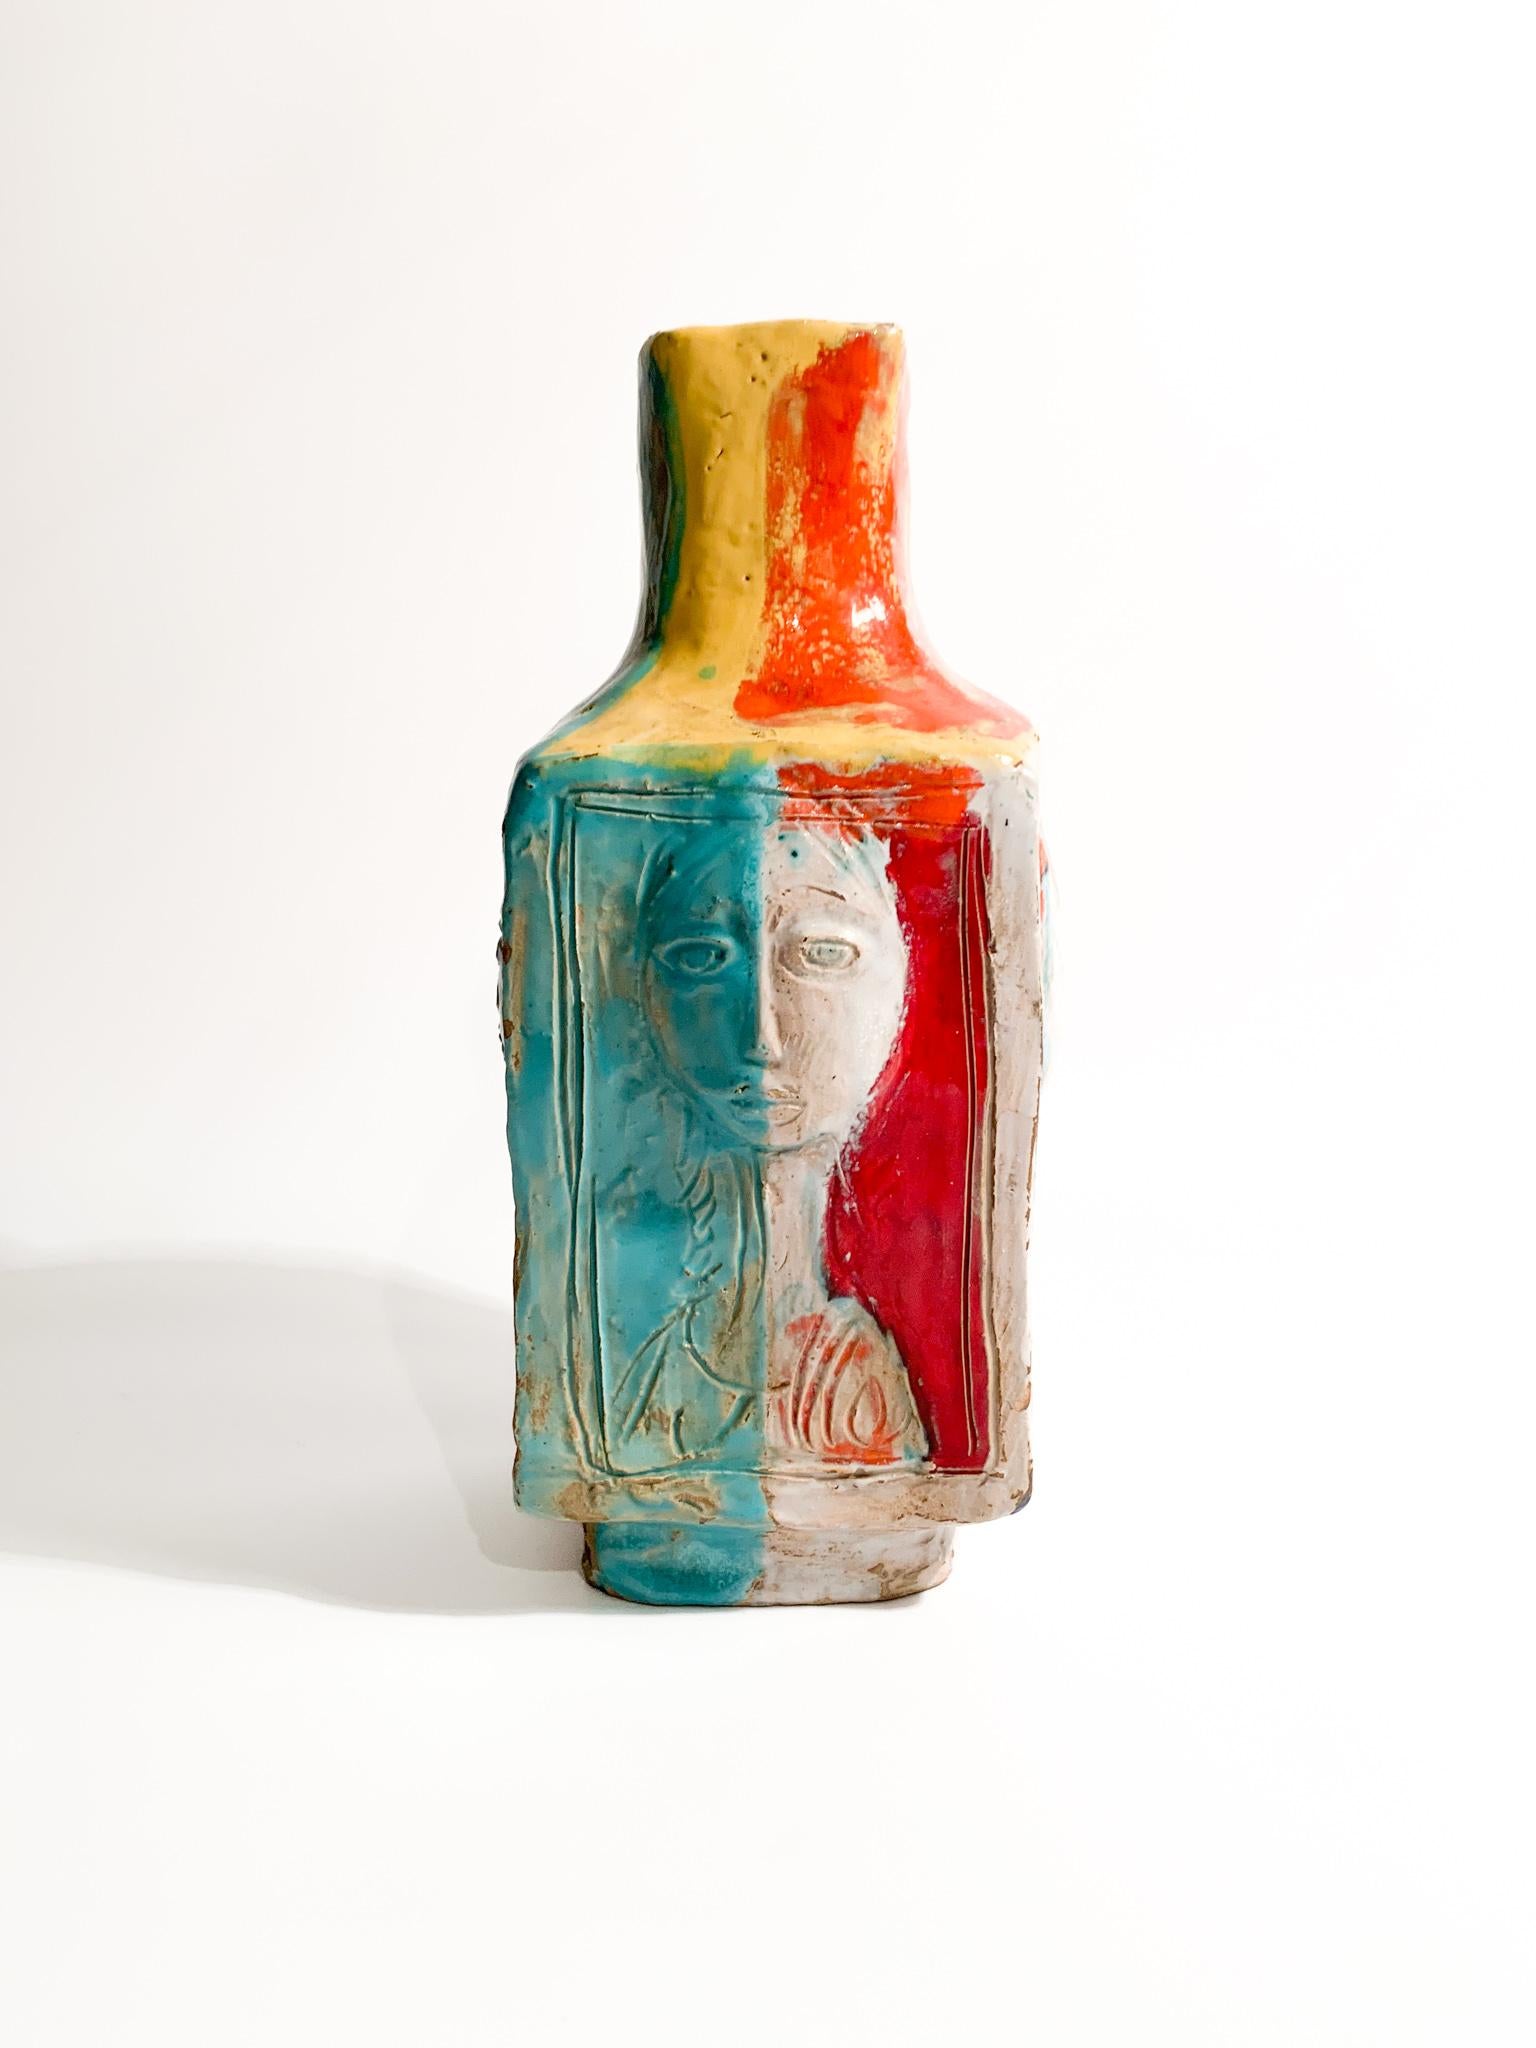 Mid-20th Century Italian Ceramic Vase Made by Cantagalli Carved in Relief 1954